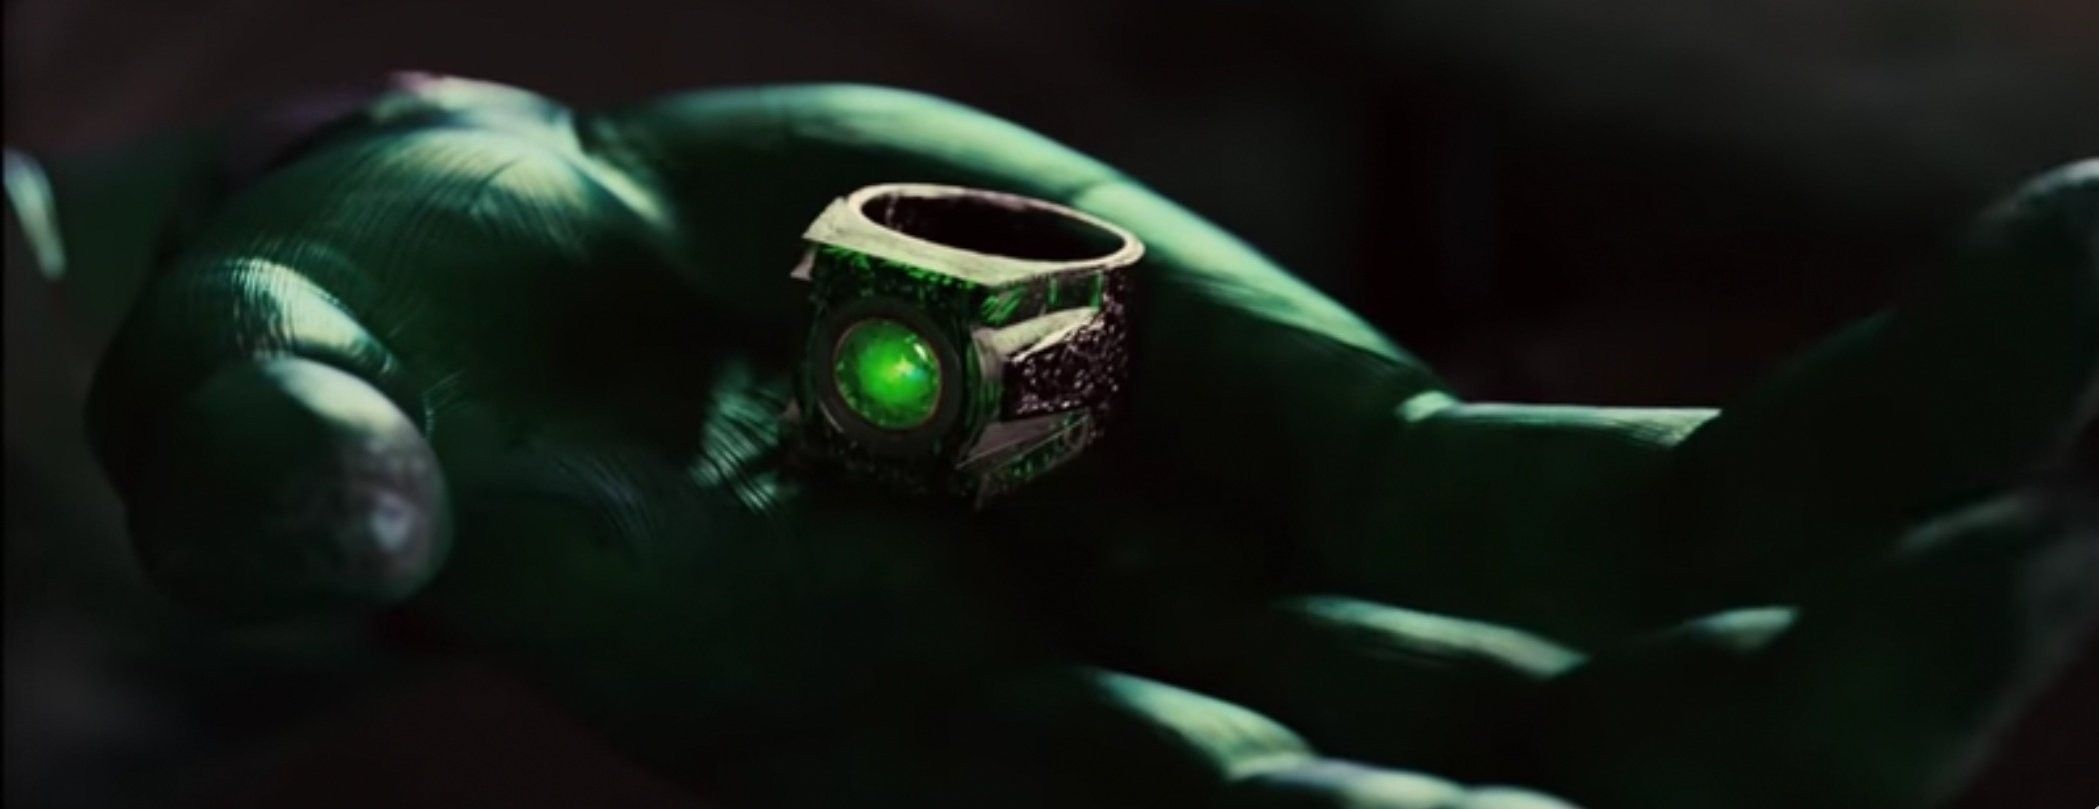 Pin By Jai James On DCEU: DC Extended Universe Of CW Arrowverse & More In 2020. Green Lantern Wallpaper, Green Lantern Movie, Green Lantern